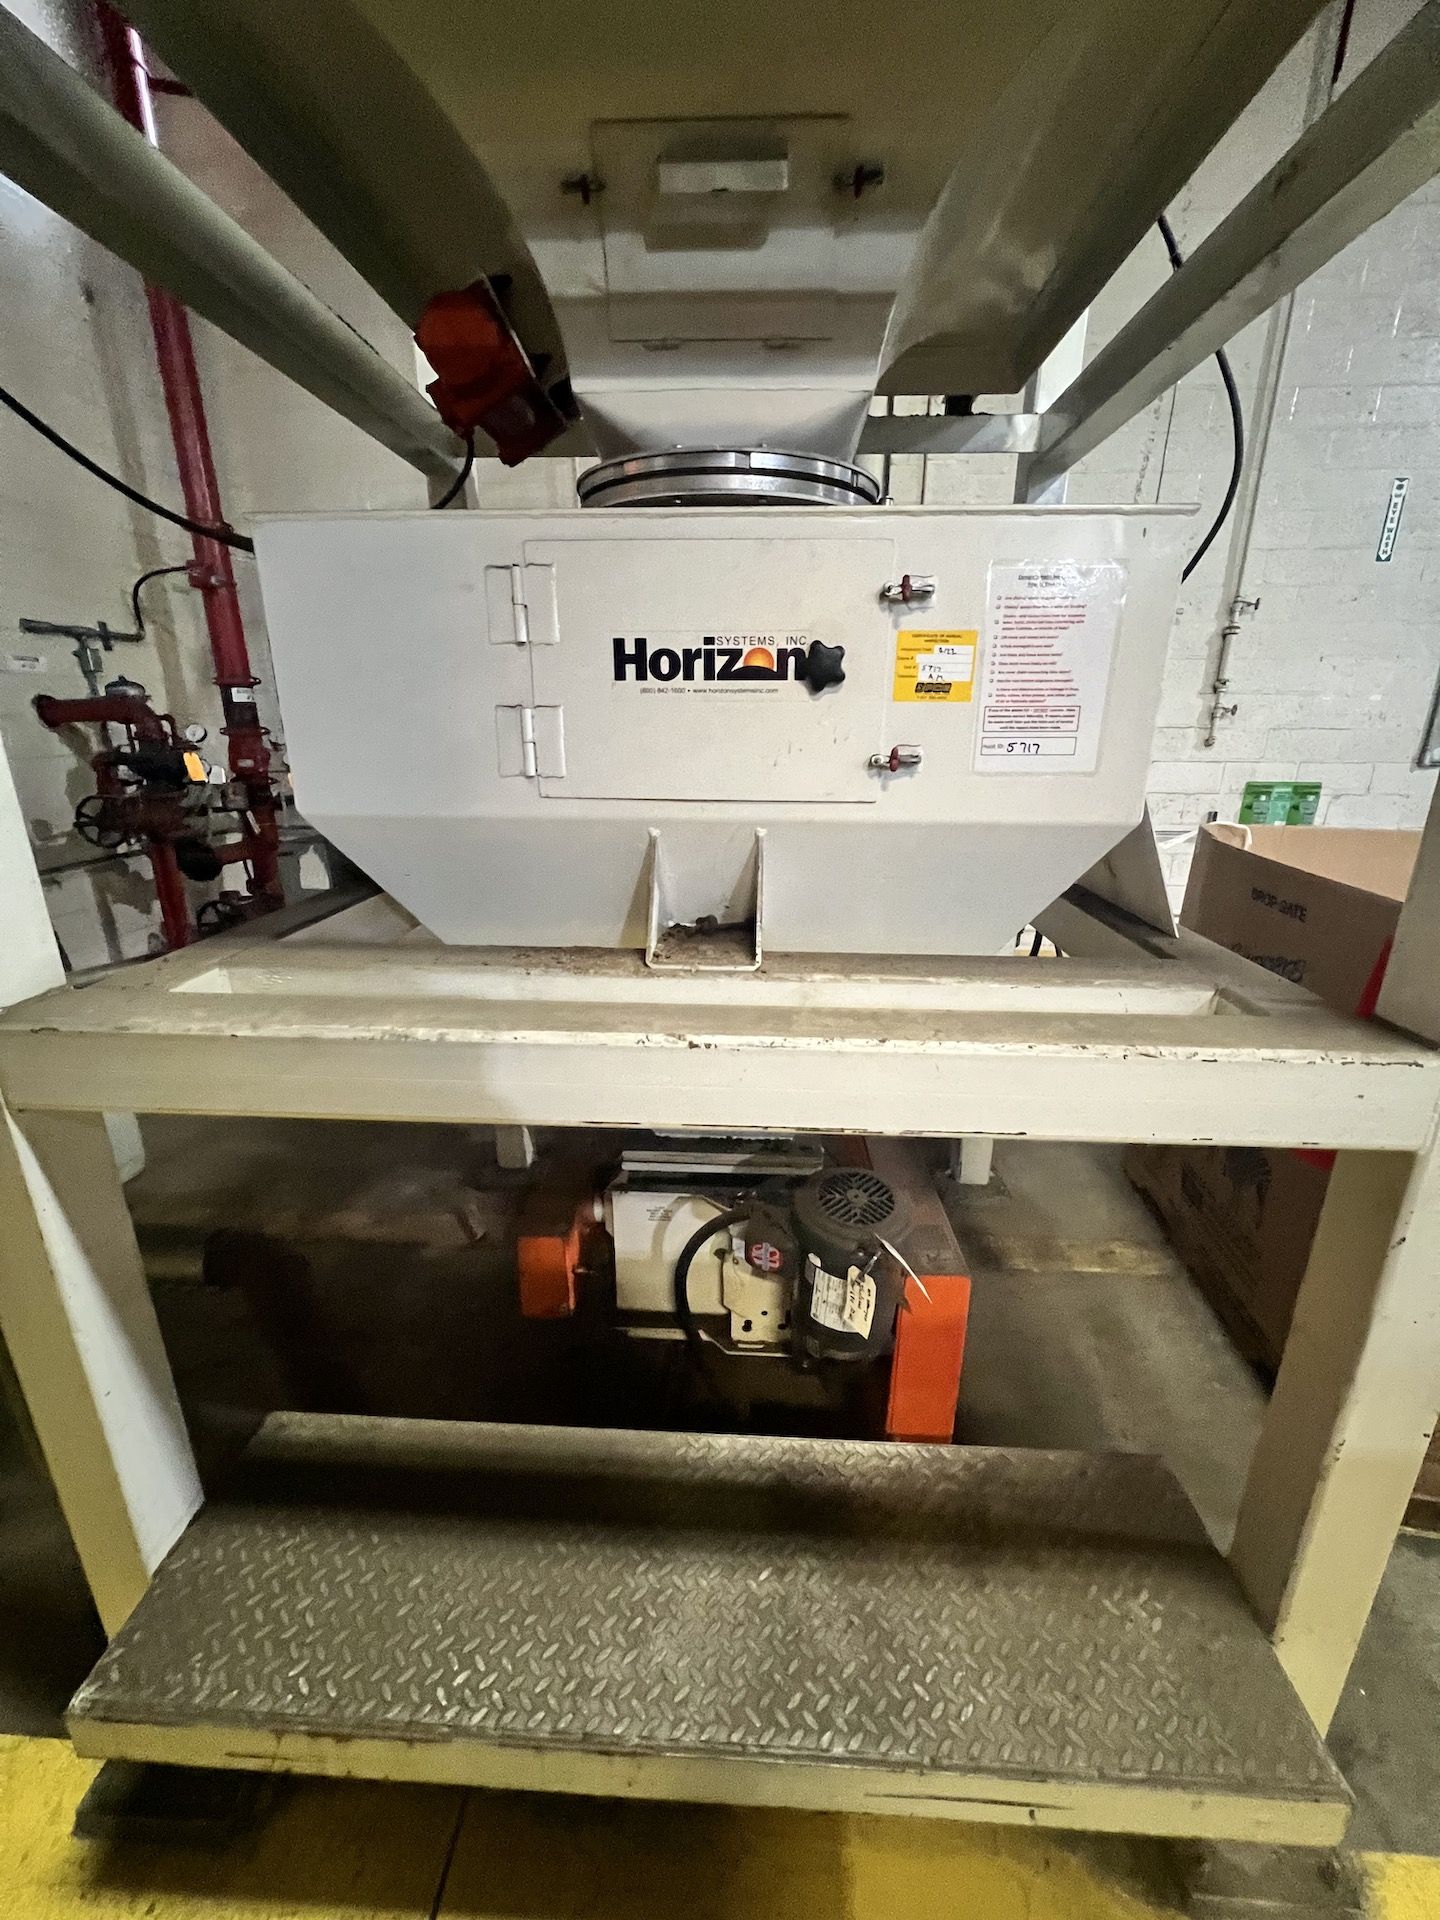 HORIZON SYSTEMS BULK BAG DISCHARGER / SUPERSAC UNLOADING SYSTEM, INCLUDES ROTARY AIRLOCK VALVE, - Image 6 of 24